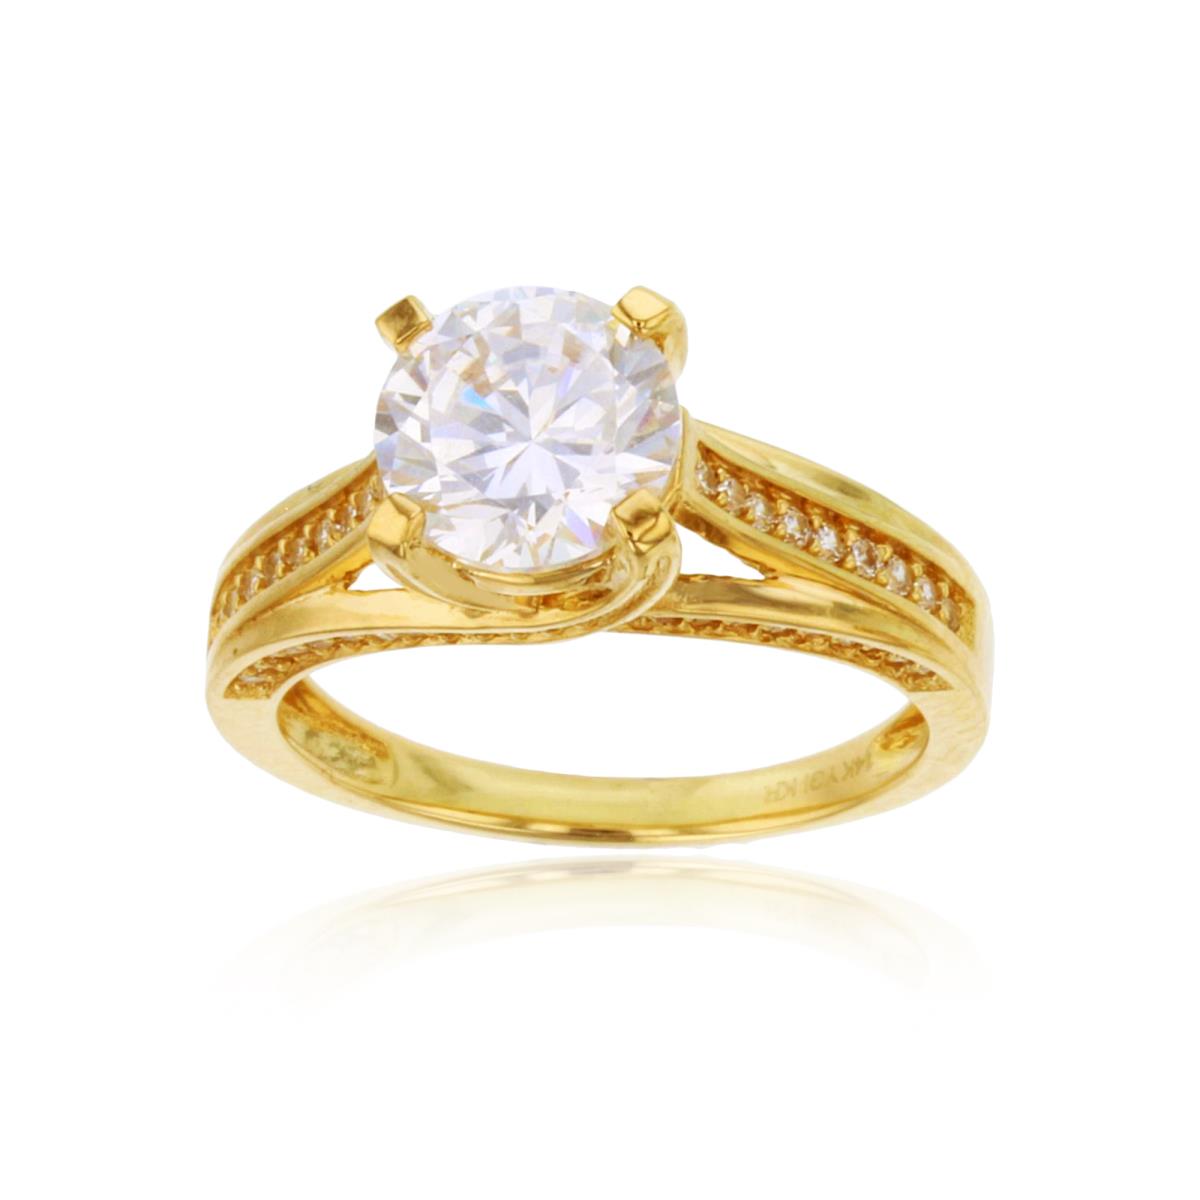 14K Yellow Gold 8mm Round Cut CZ Twisted Shank Engagement Ring